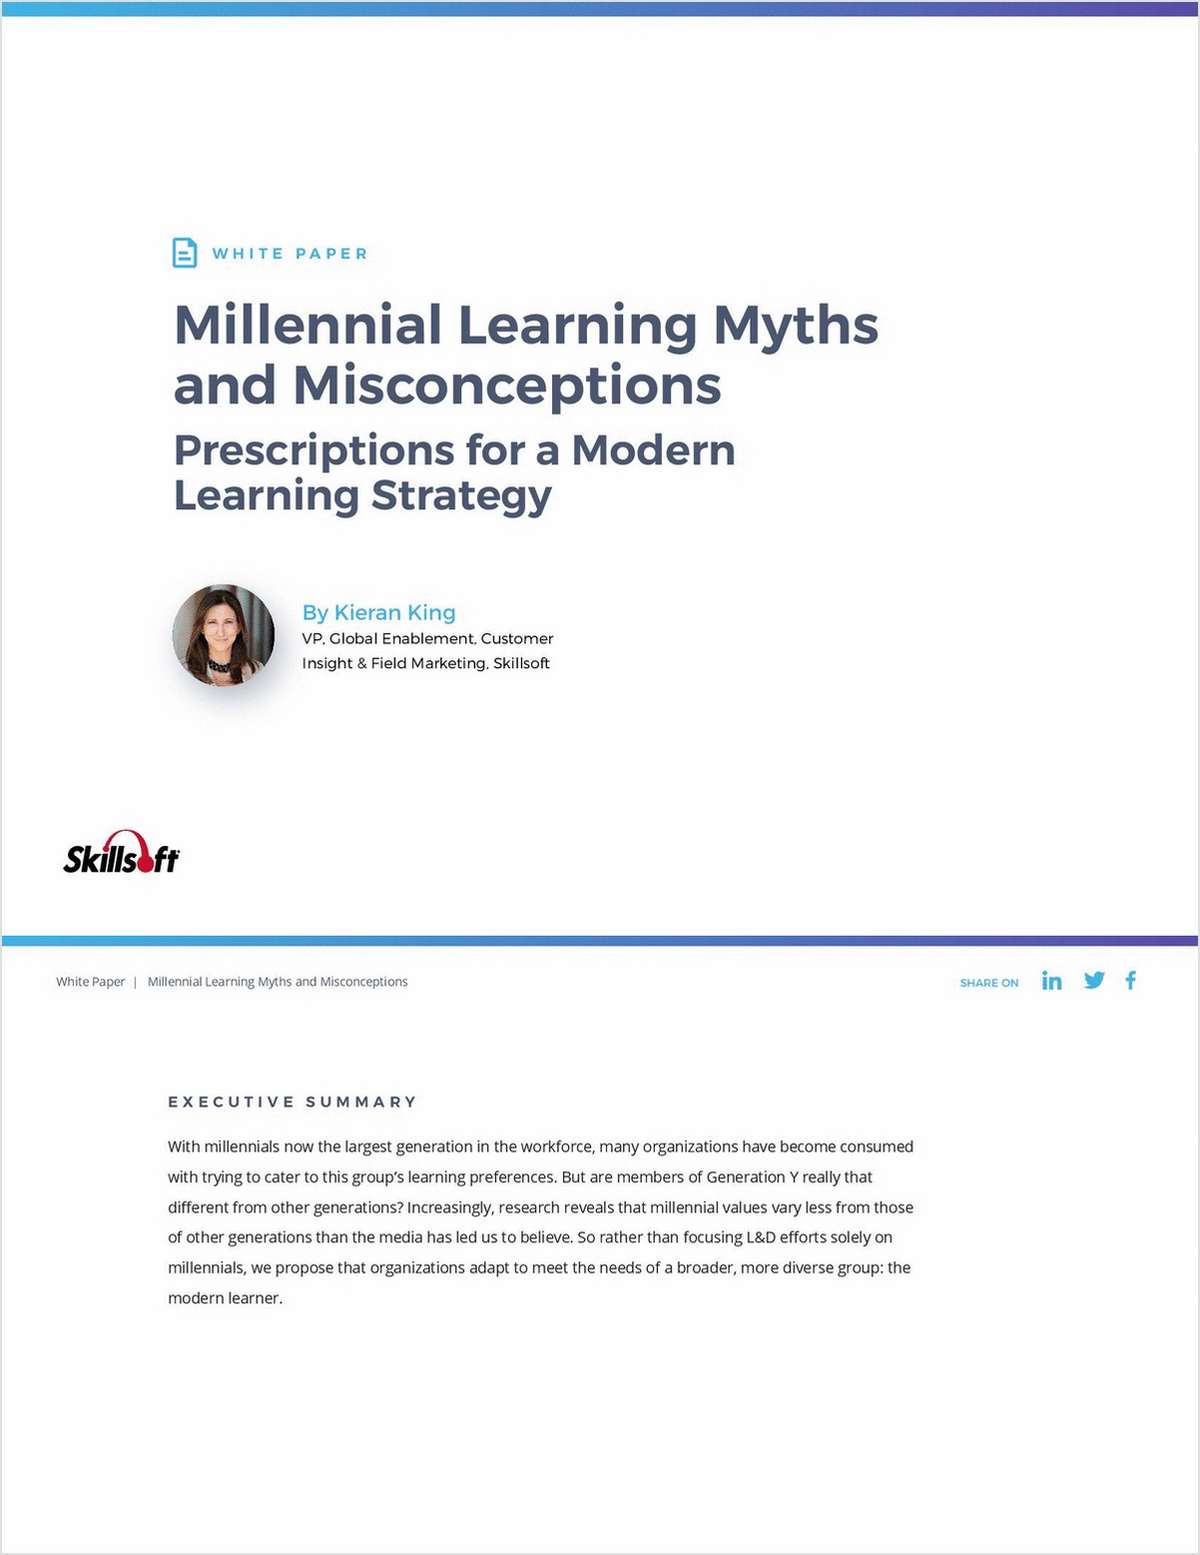 Millennial Learning Myths & Misconceptions: Prescriptions for a Modern Learning Strategy